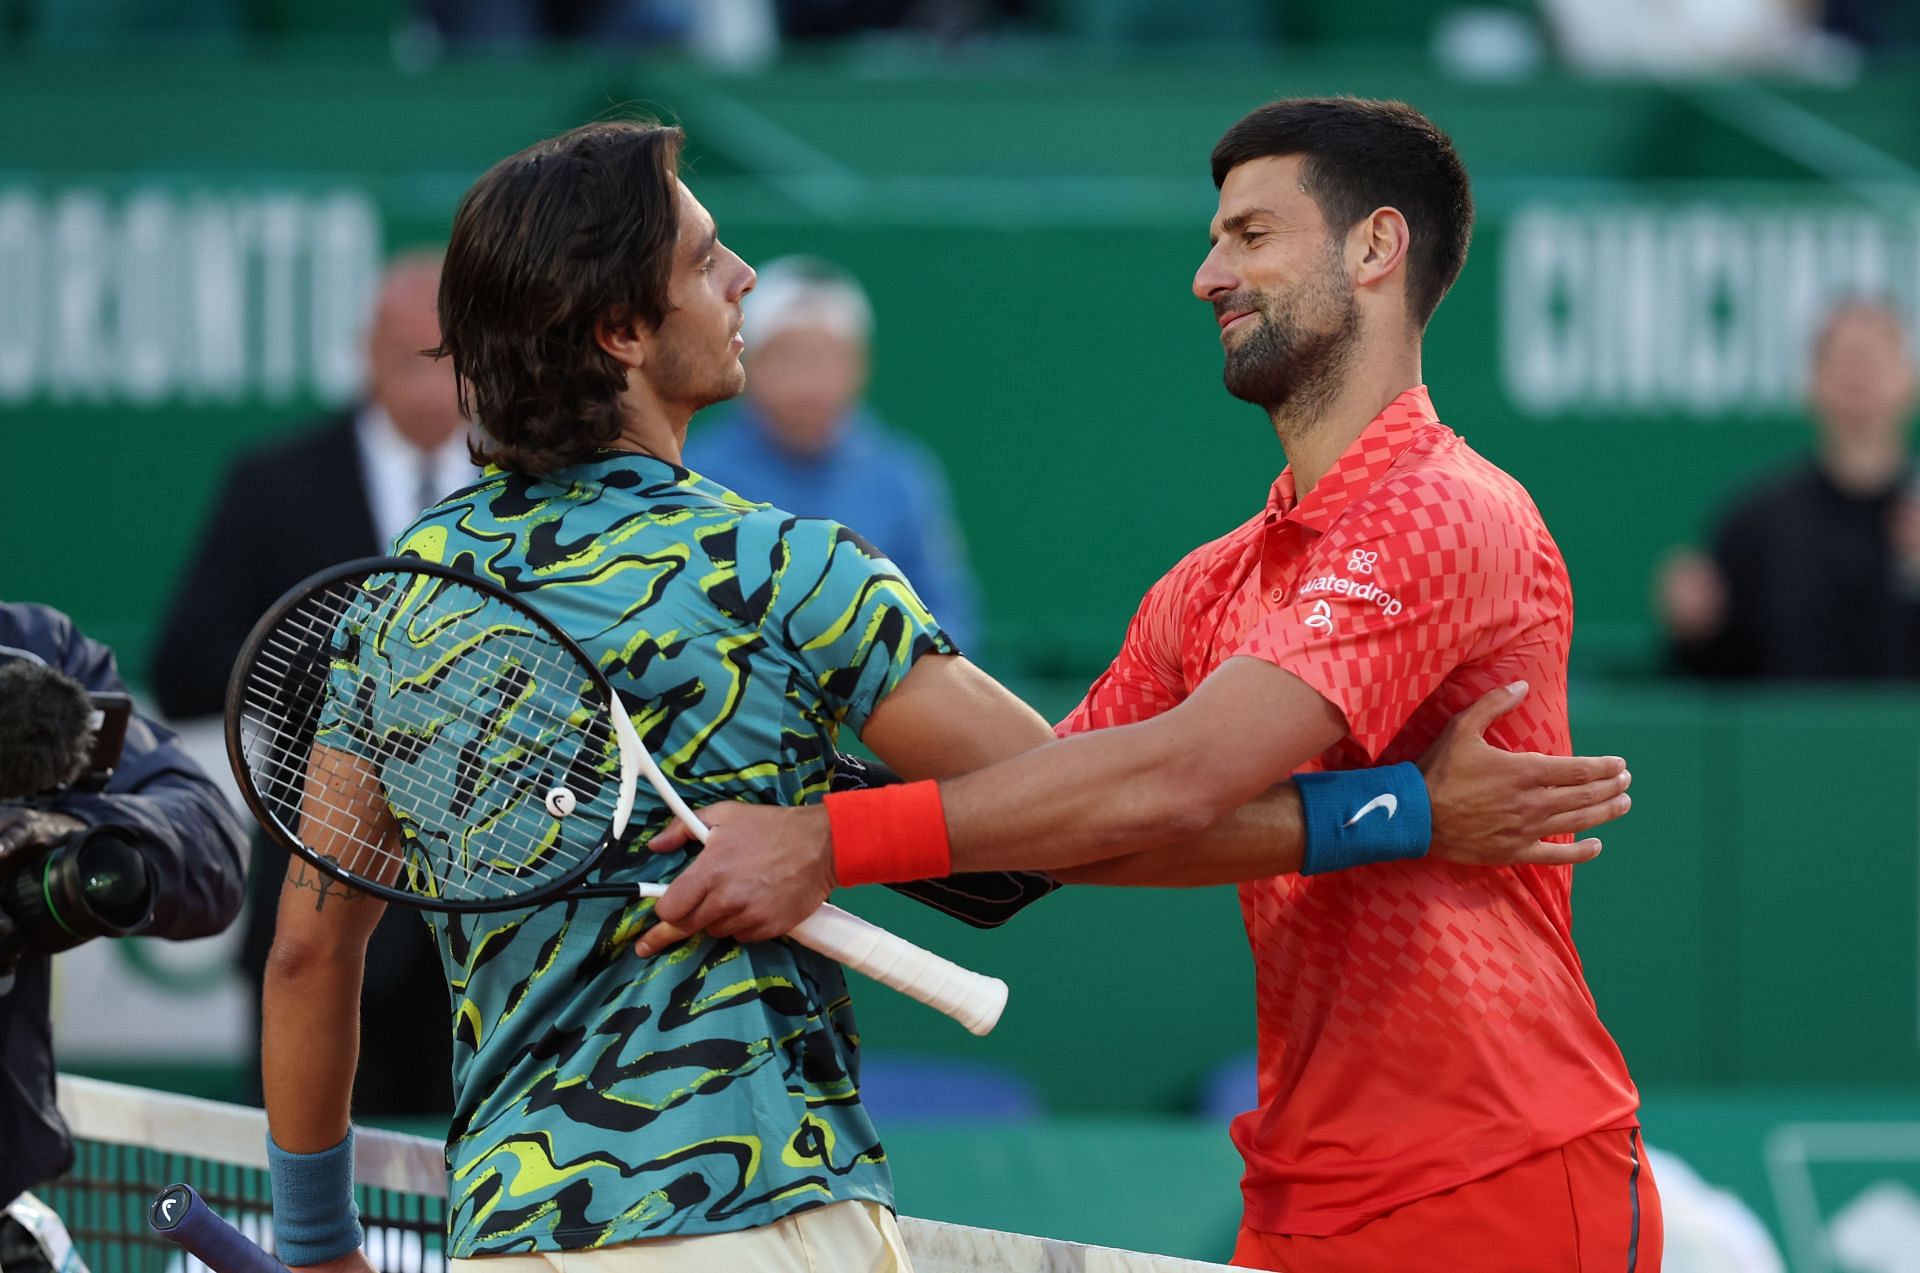 Djokovic (right) lost to Musetti in the Monte-Carlo third round.